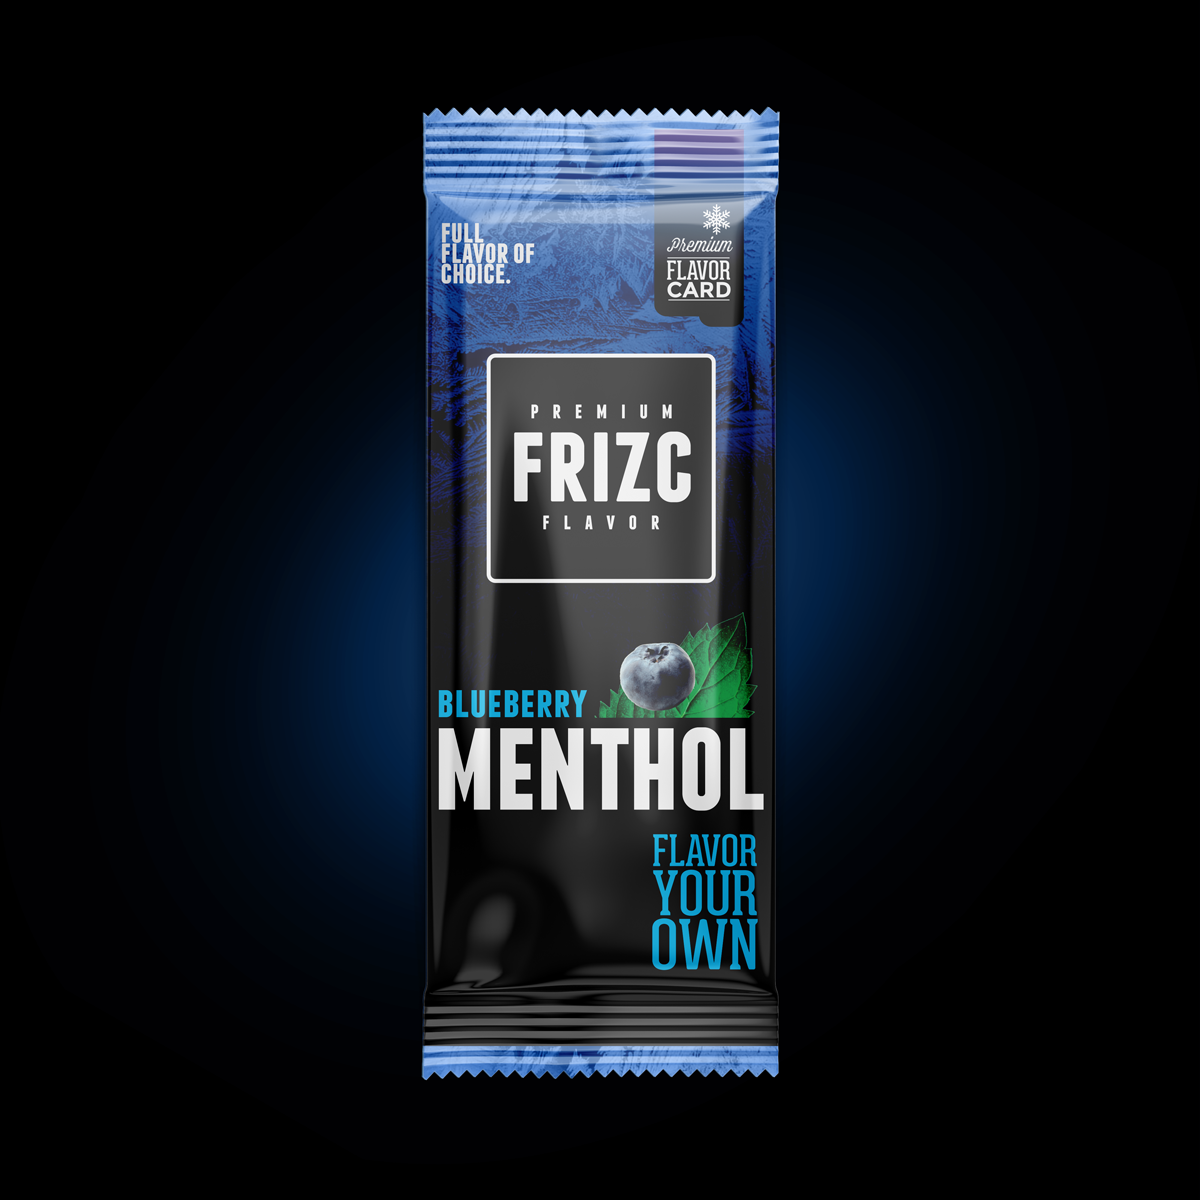 Blueberry menthol 25 pack.